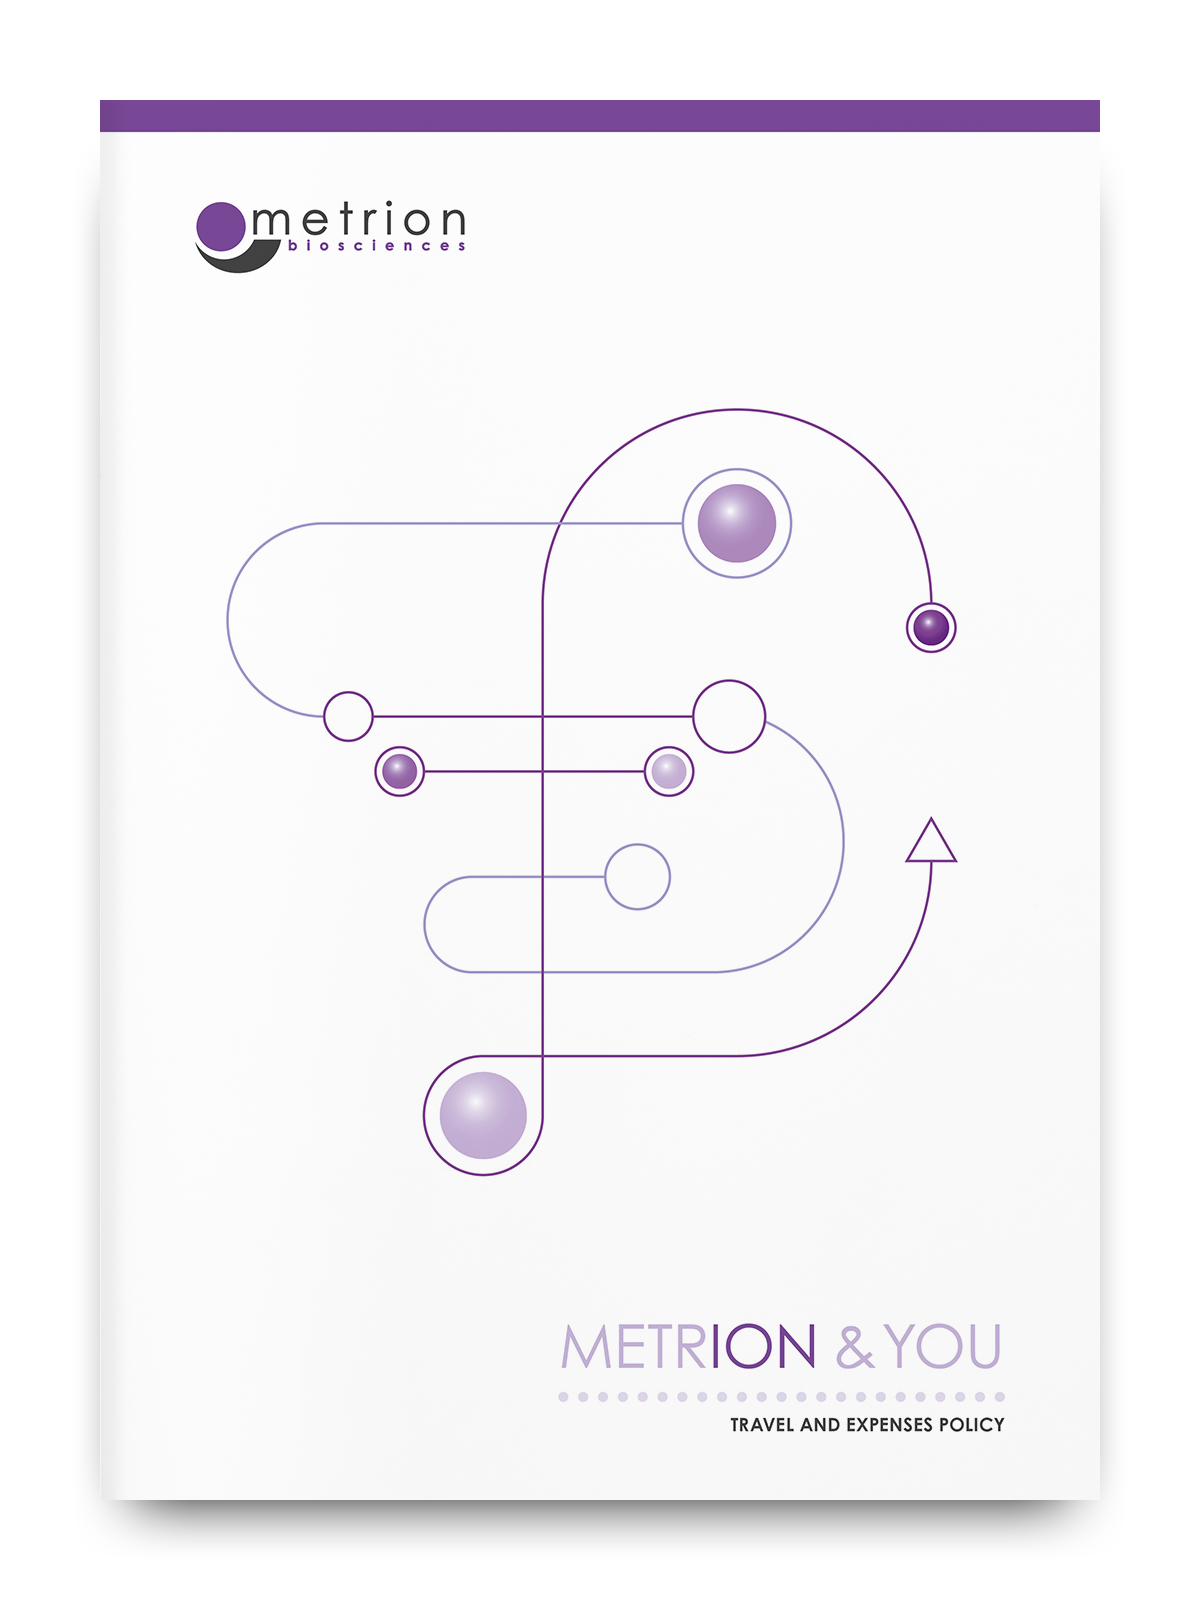 Metrion and you - Internal Communications - Brochure by Peek Creative Limited